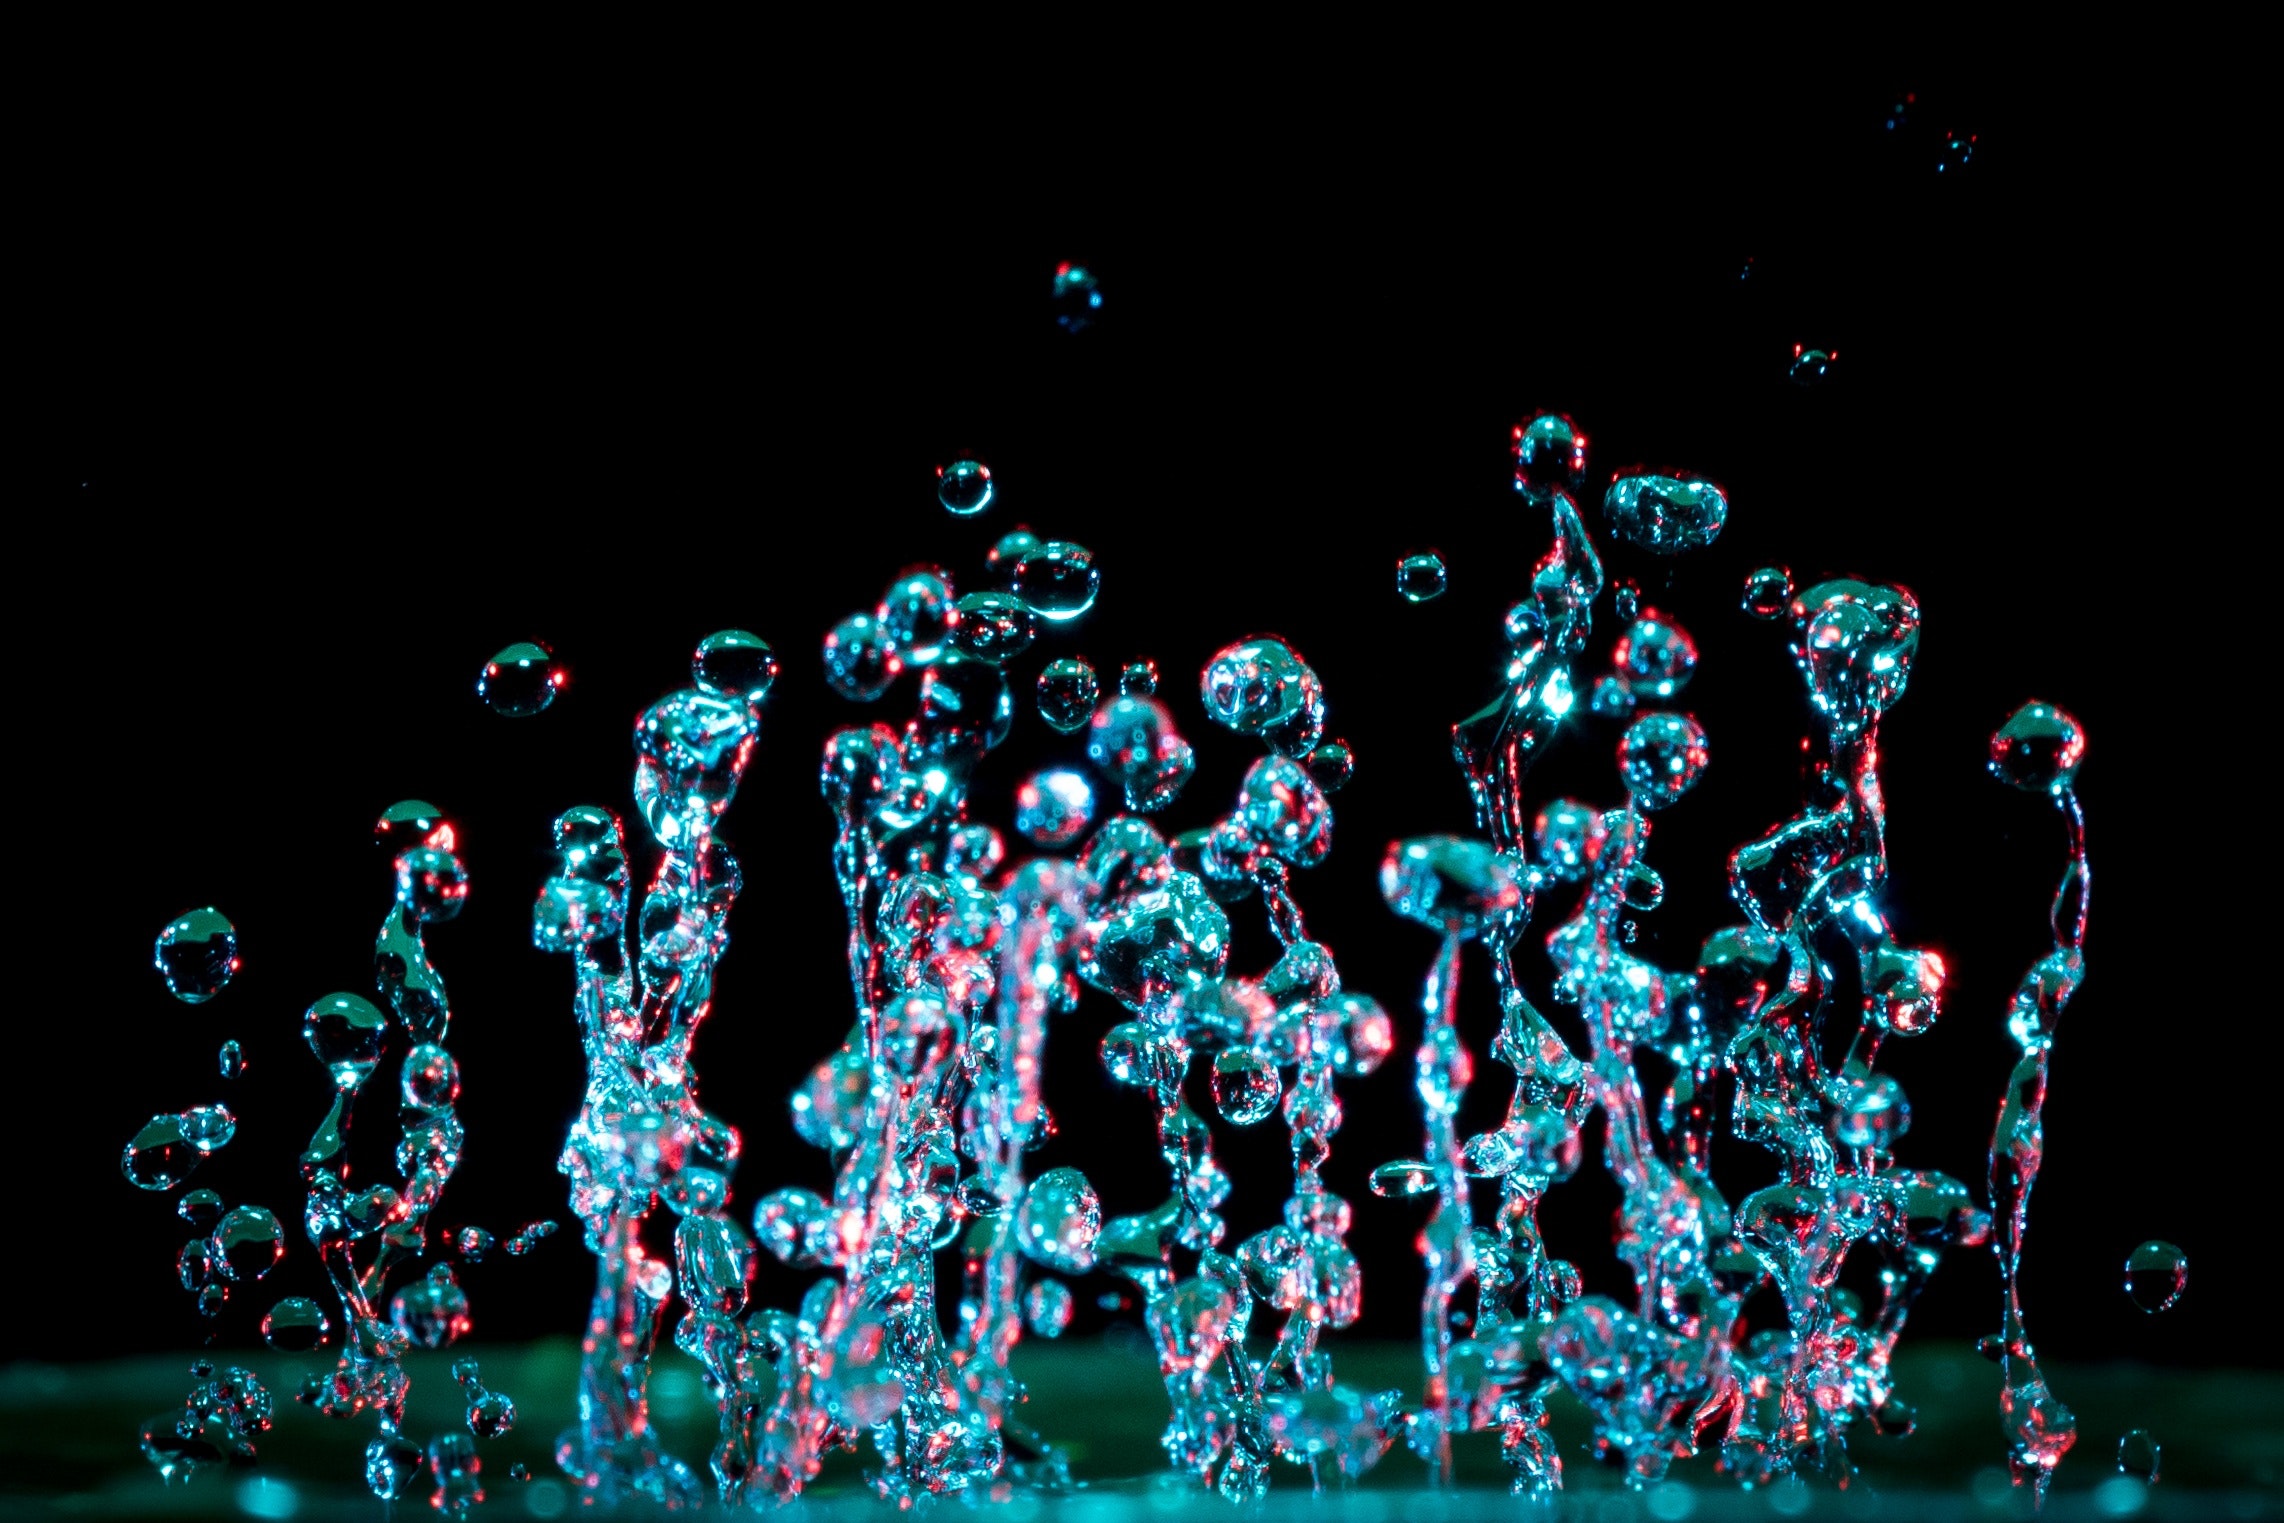 Decorative image of water droplets